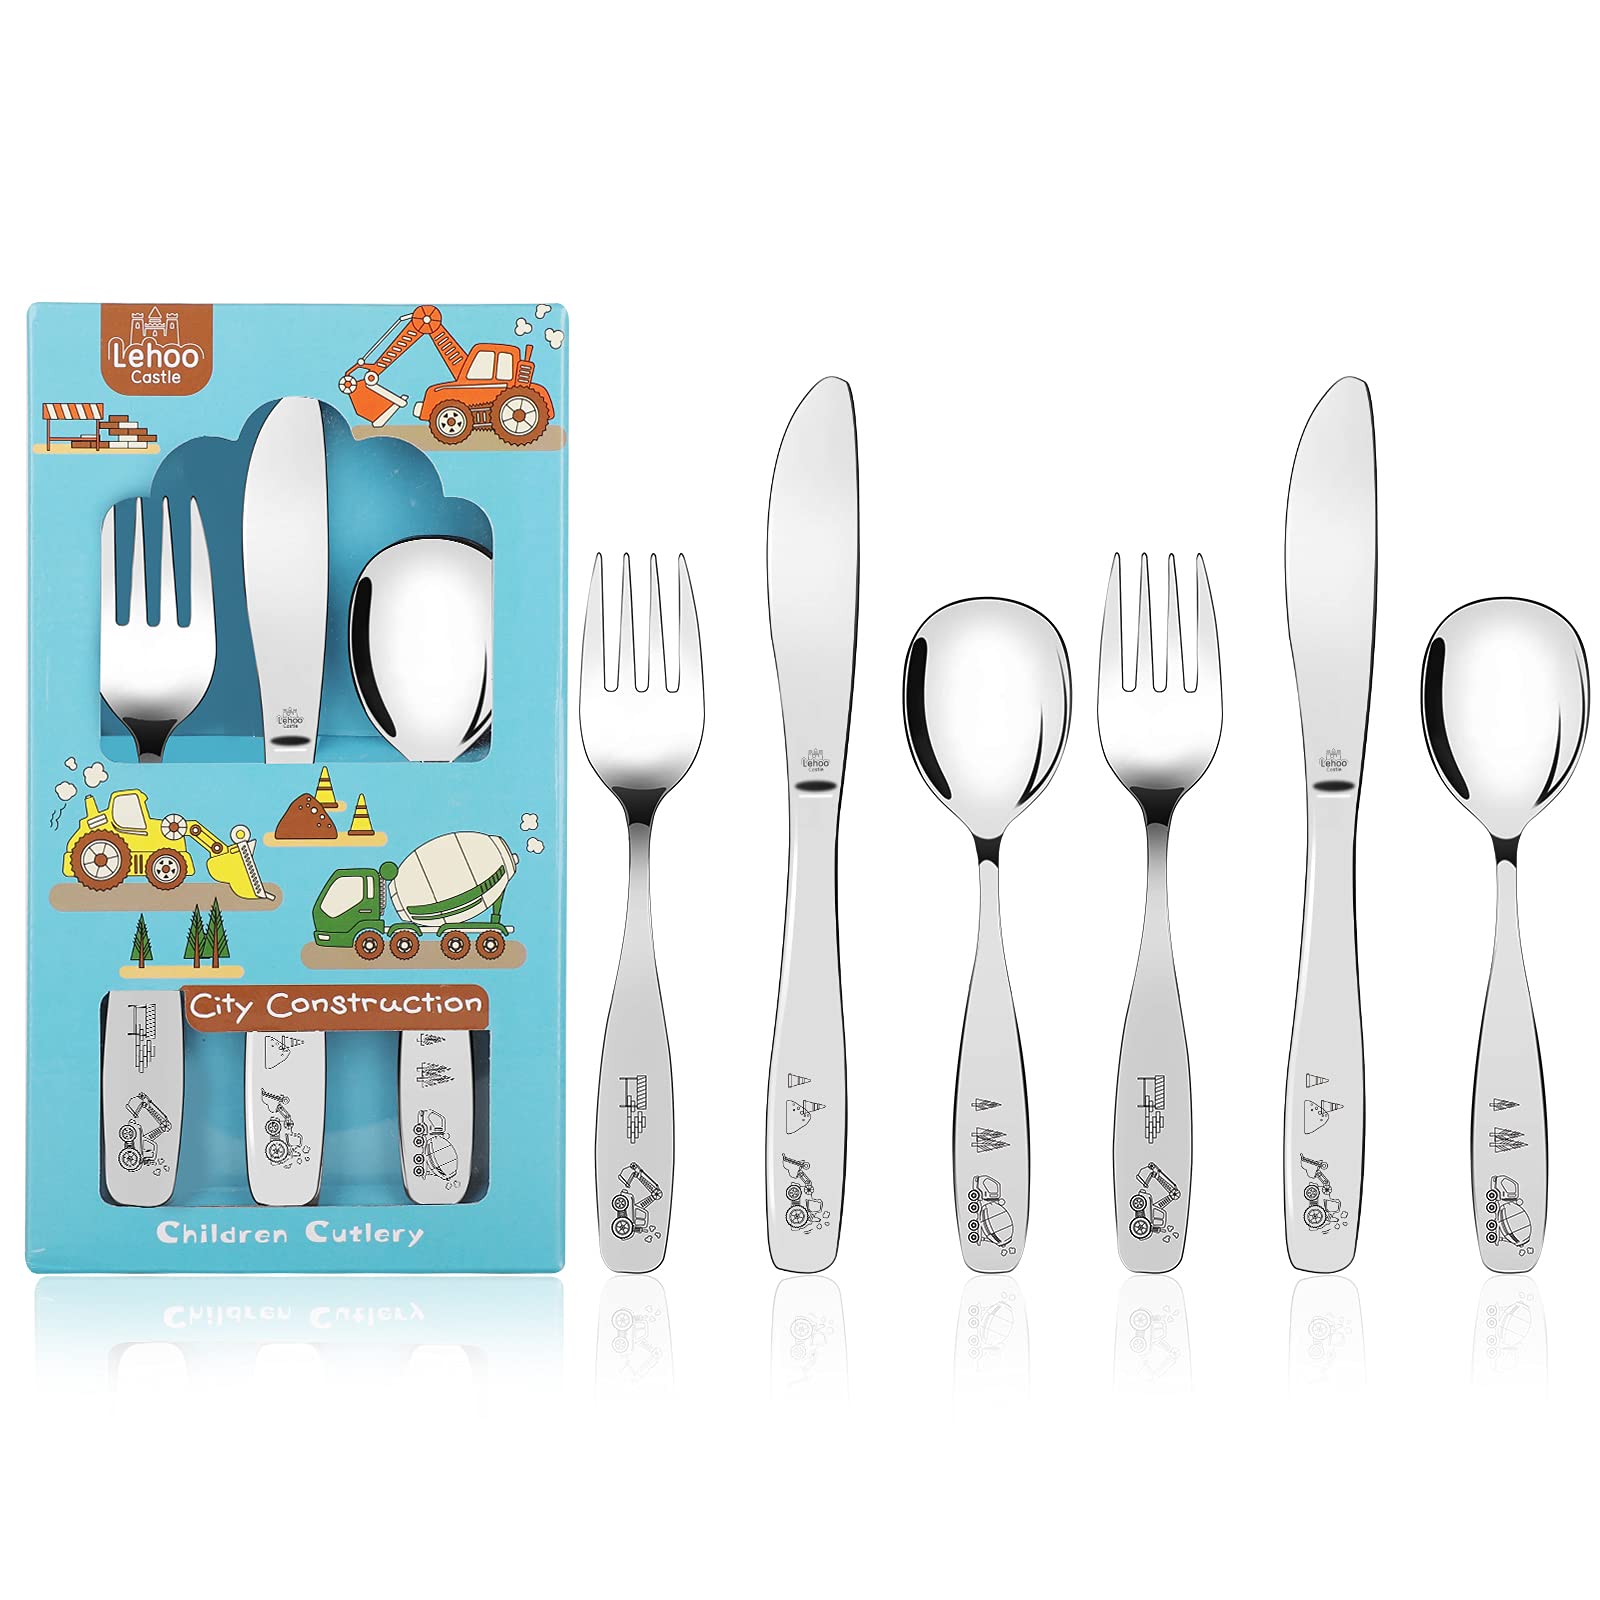 Lehoo castle Kids Silverware Stainless Steel, 6pcs Toddler Spoons and Forks Knife Set, Safe children Flatware, Silverware for To